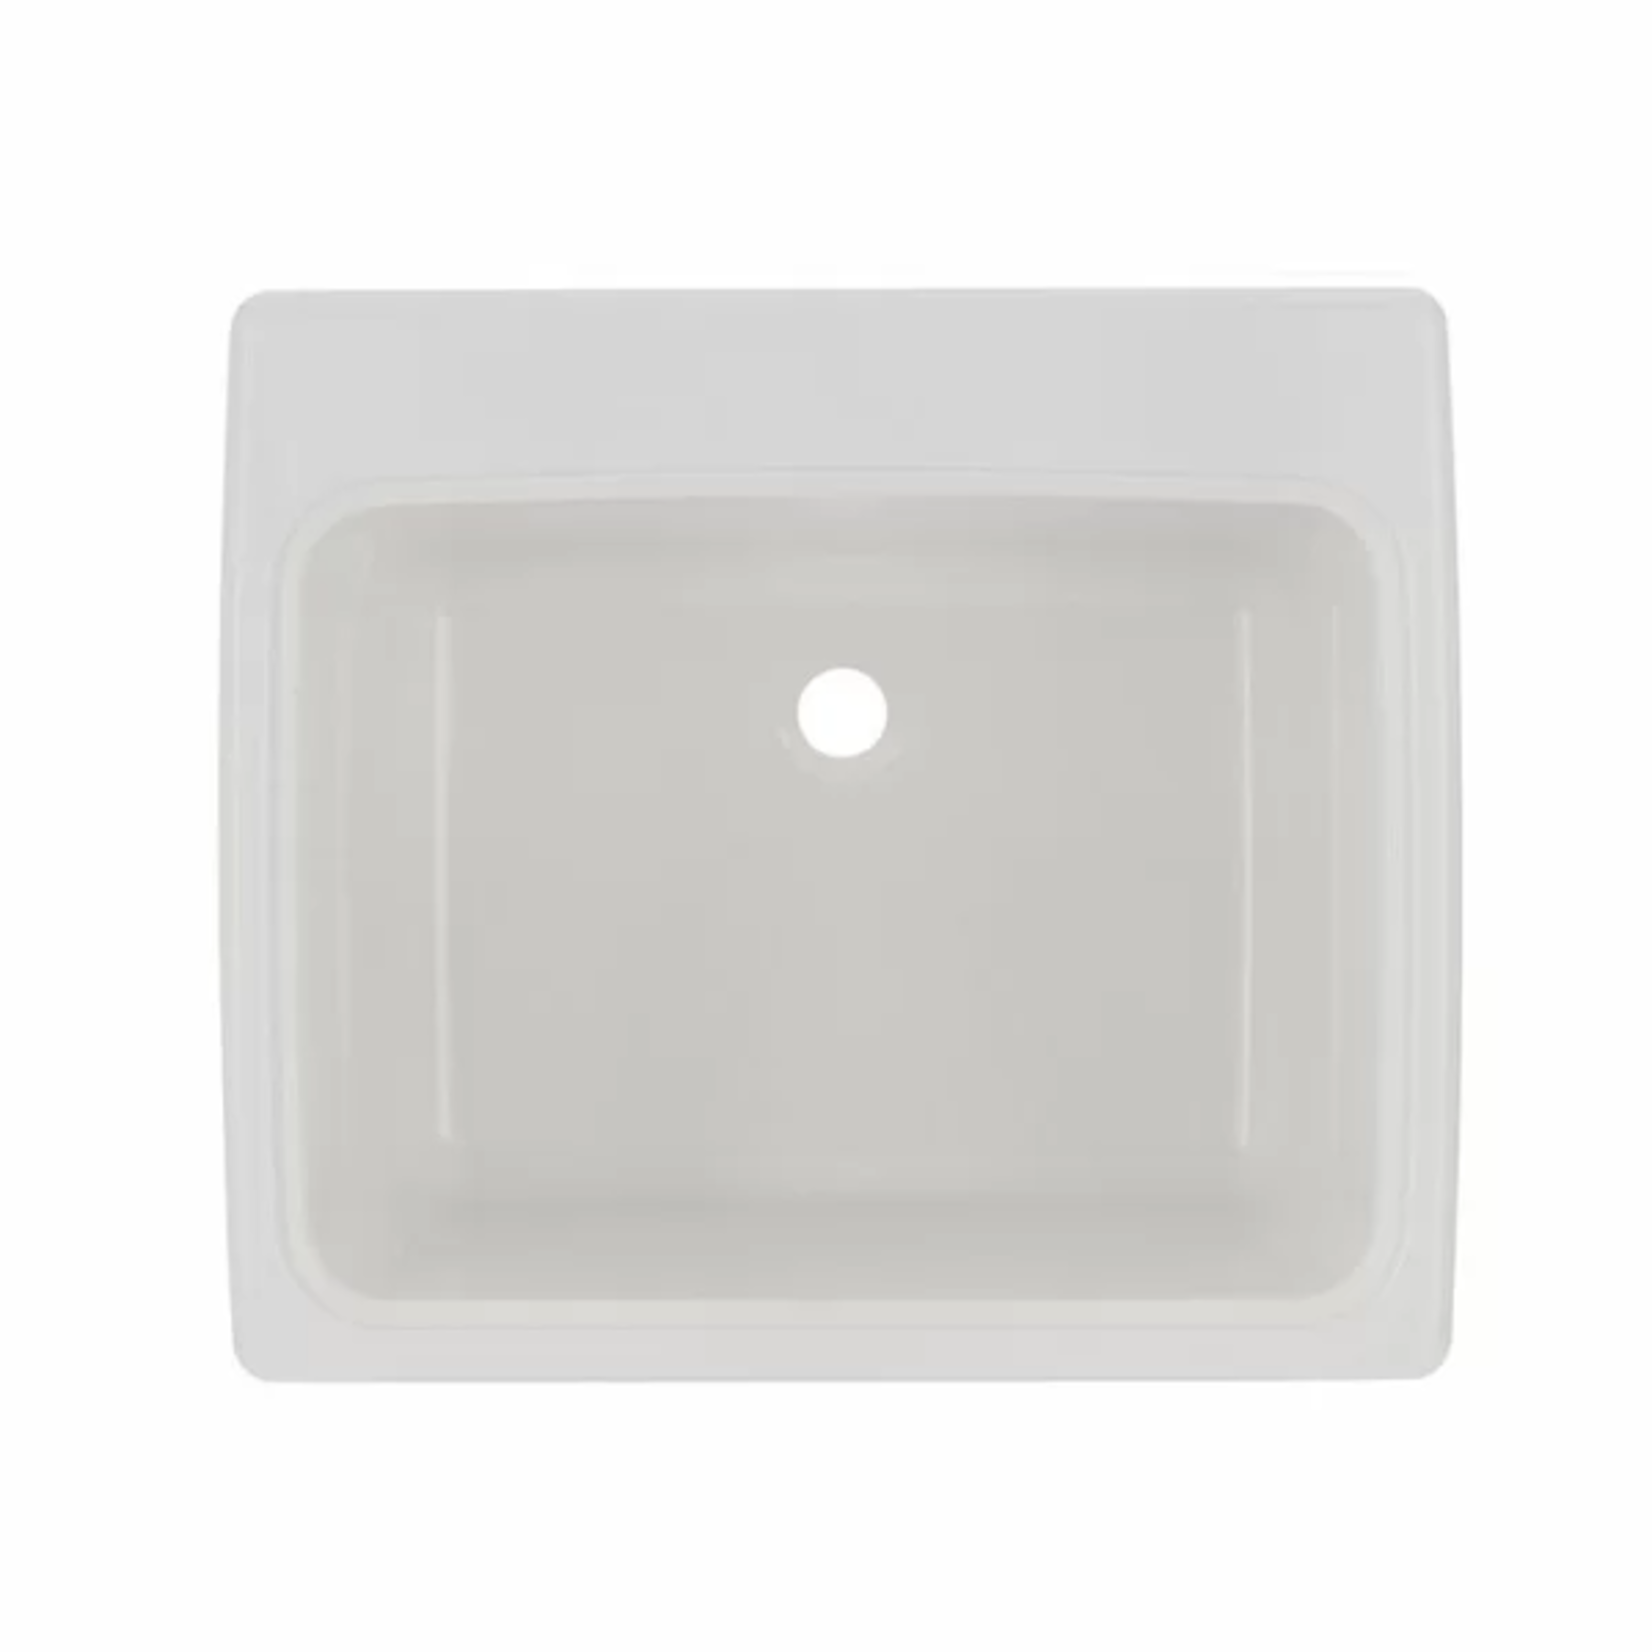 *Solid Surface 25" x 22" Drop-In/Undermount Laundry Sink